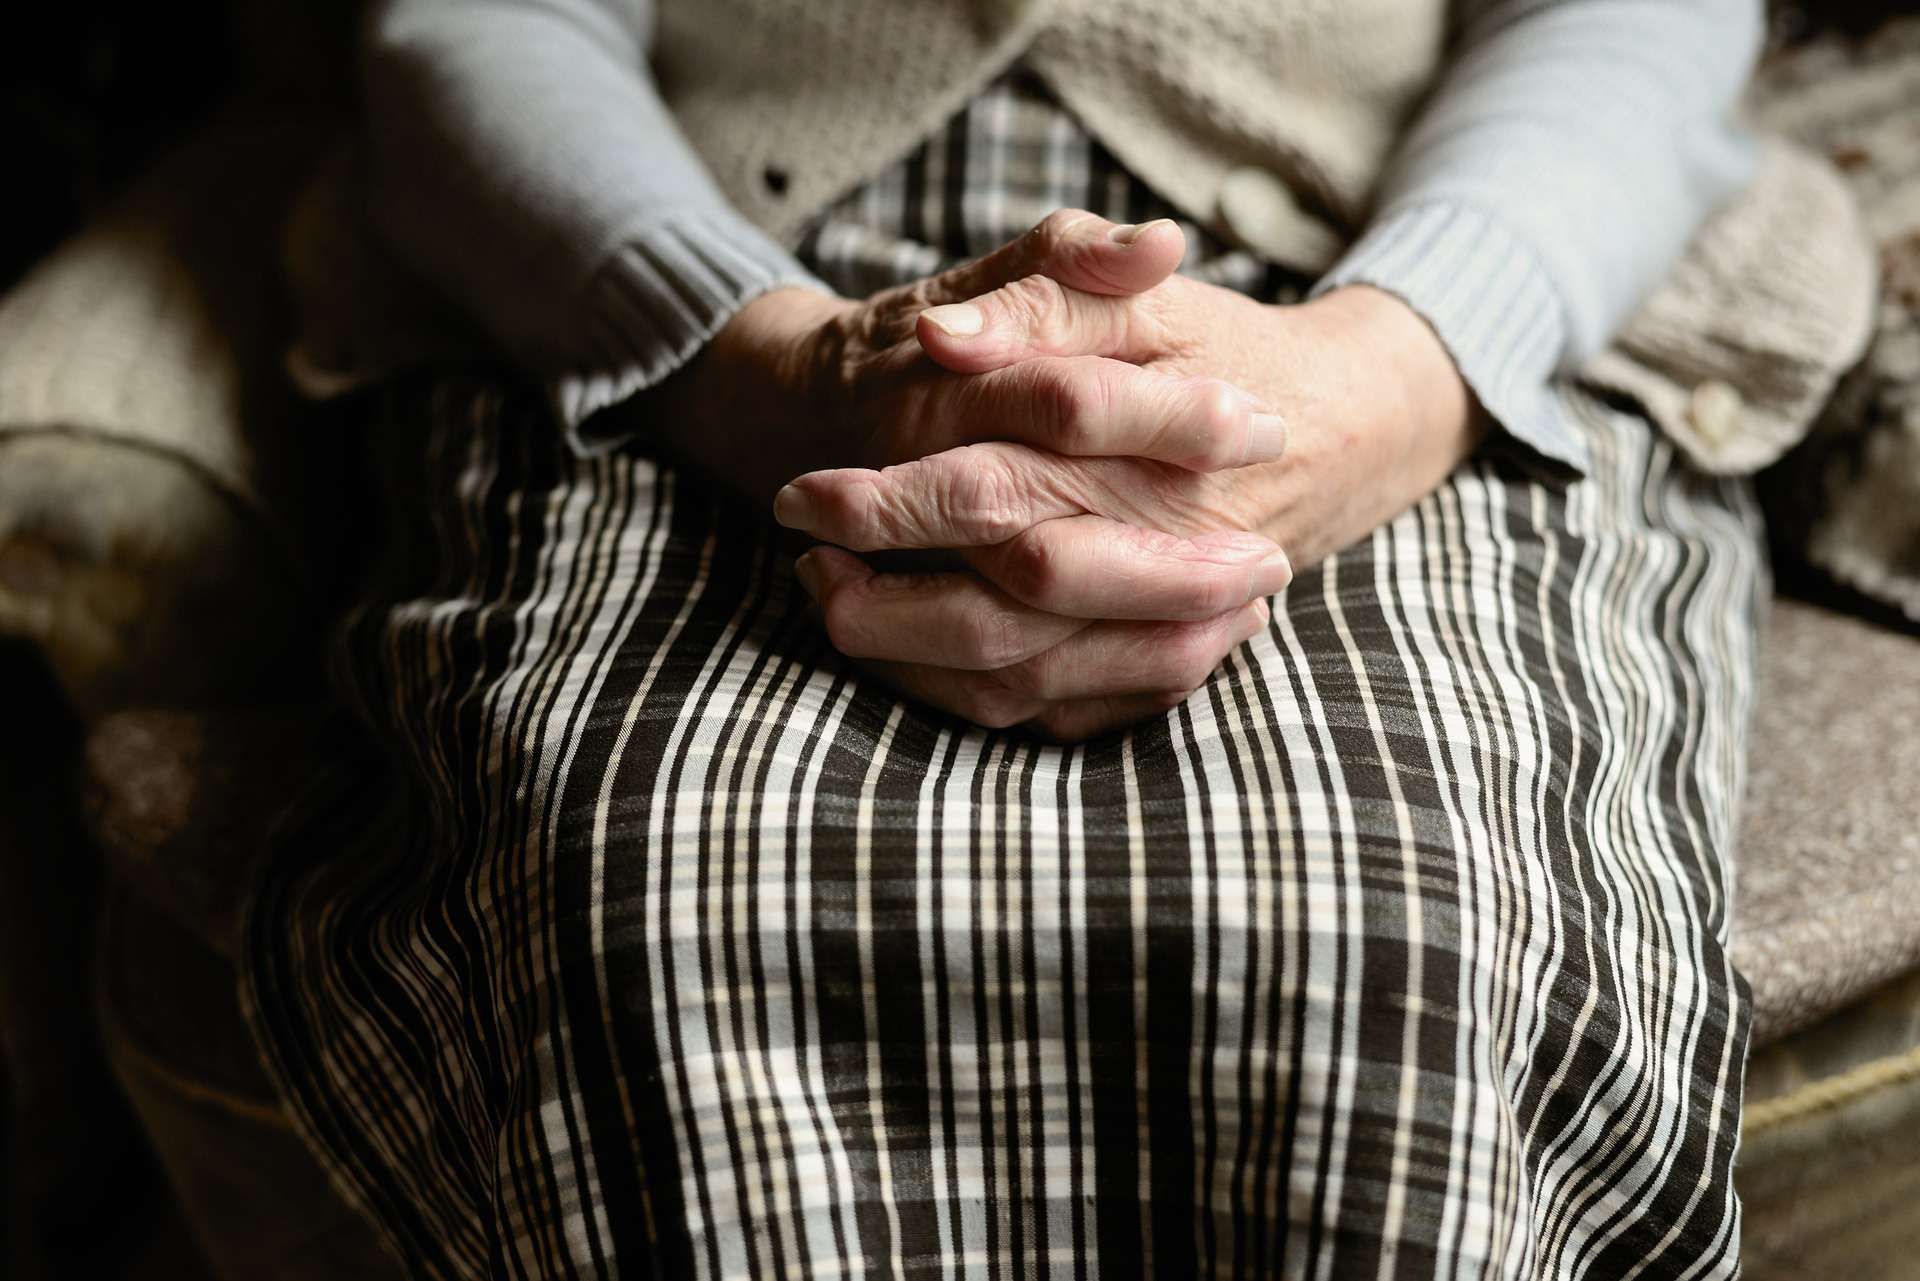 An elderly person sat with their hands clasped on the edge of a bed.